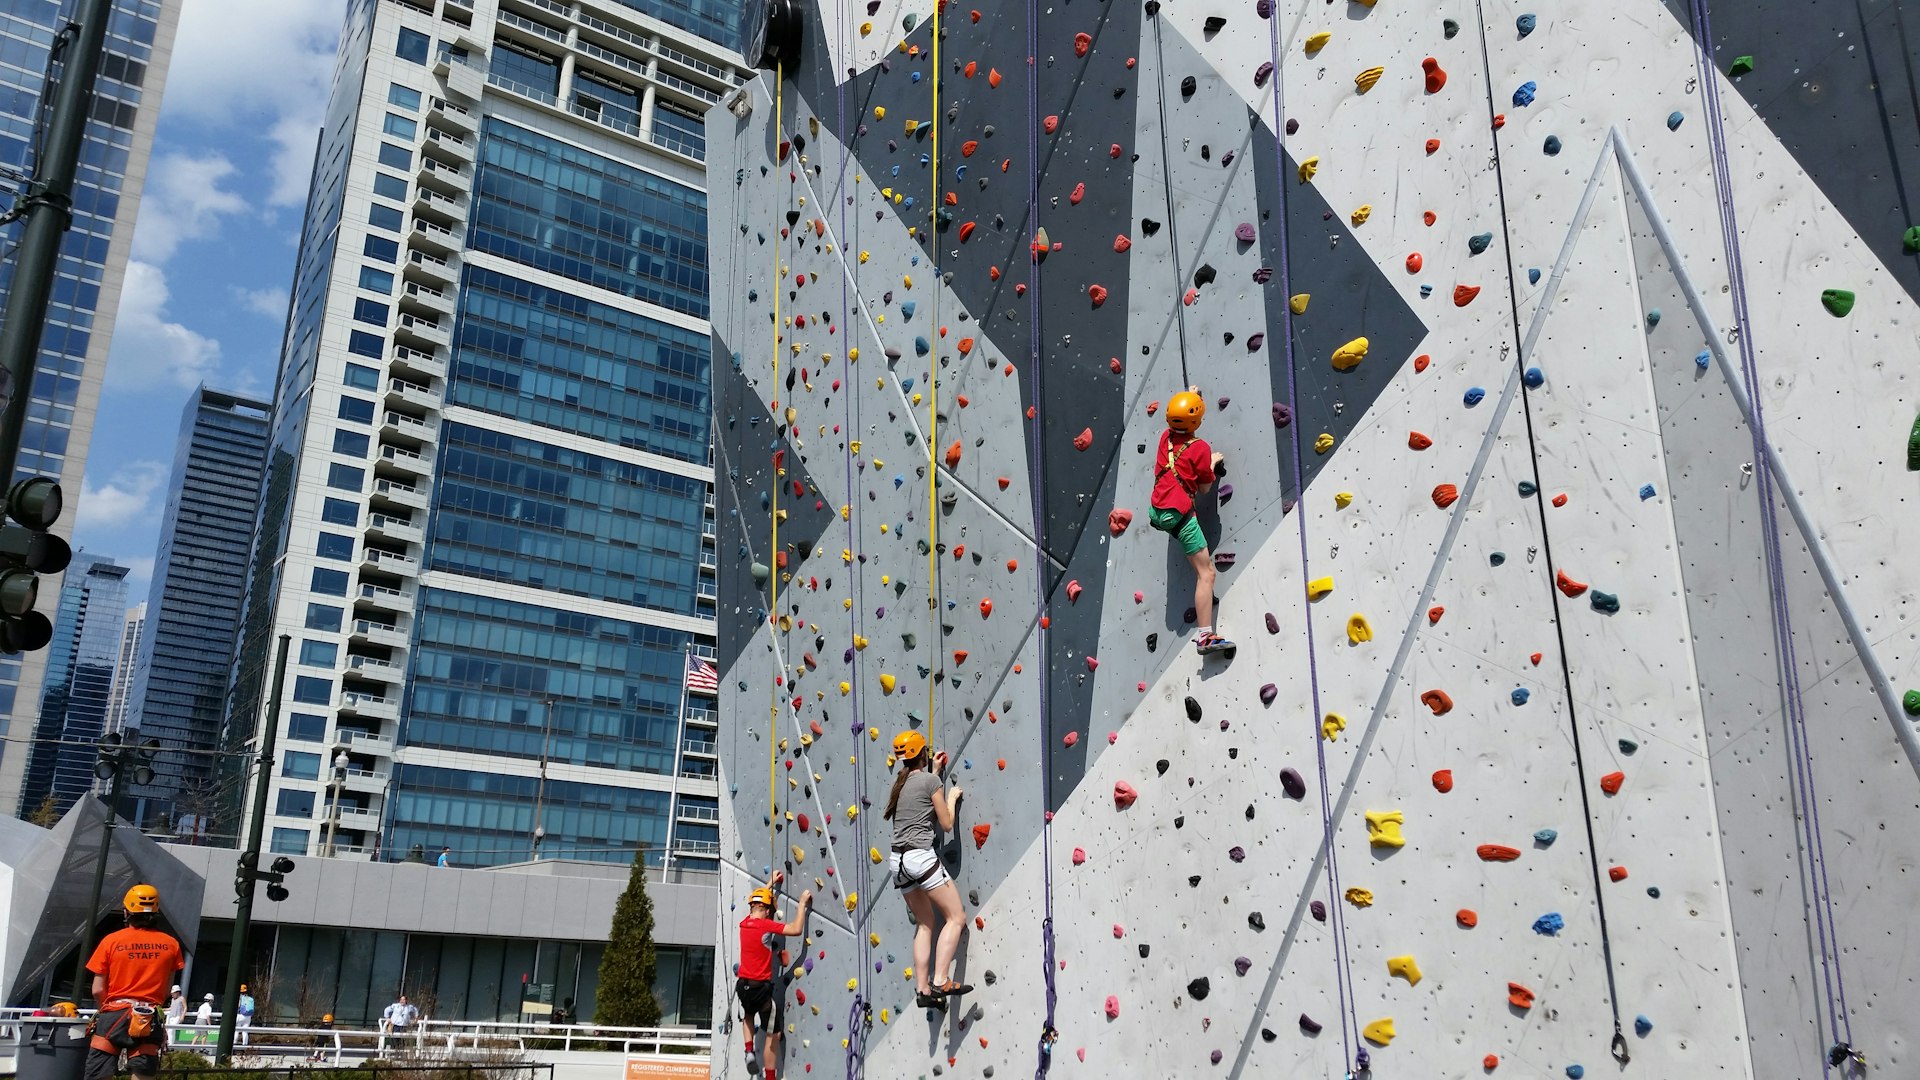 A 40-foot-high outdoor rock climbing wall at Maggie Daley Park near Chicago's Millennium Park. 